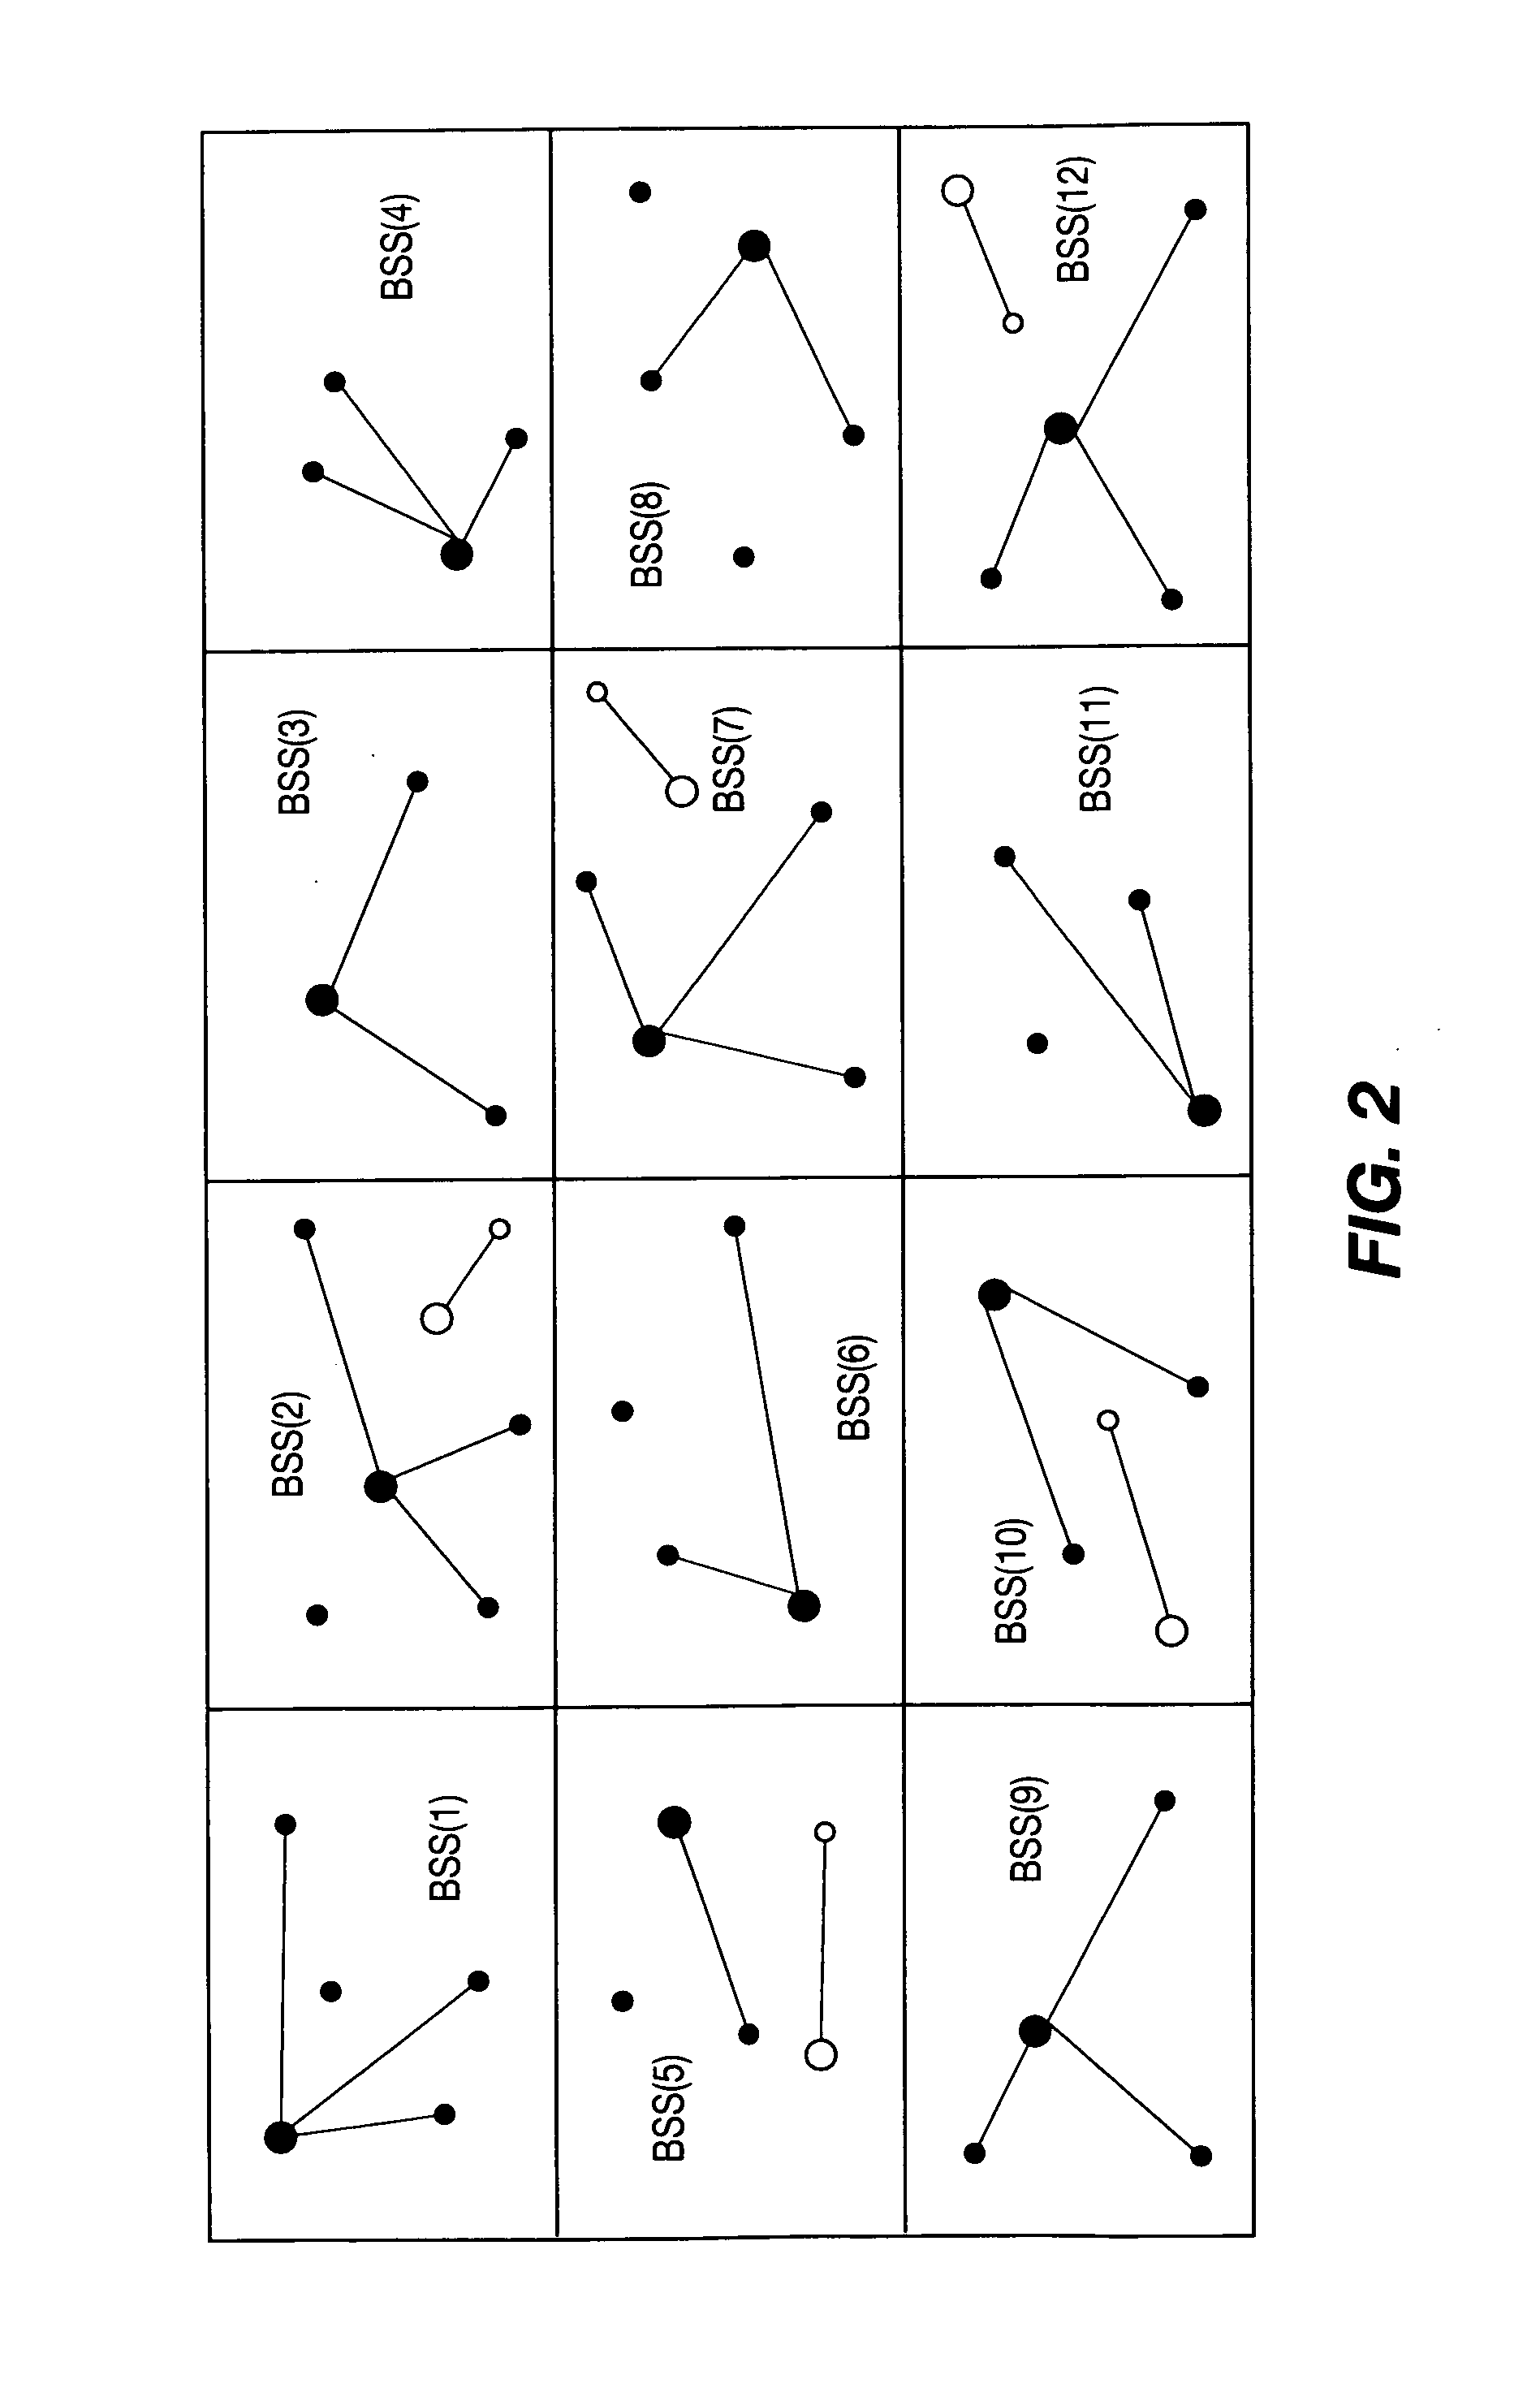 Centralized channel selection method and apparatus for wireless networks in a dense deployment environment